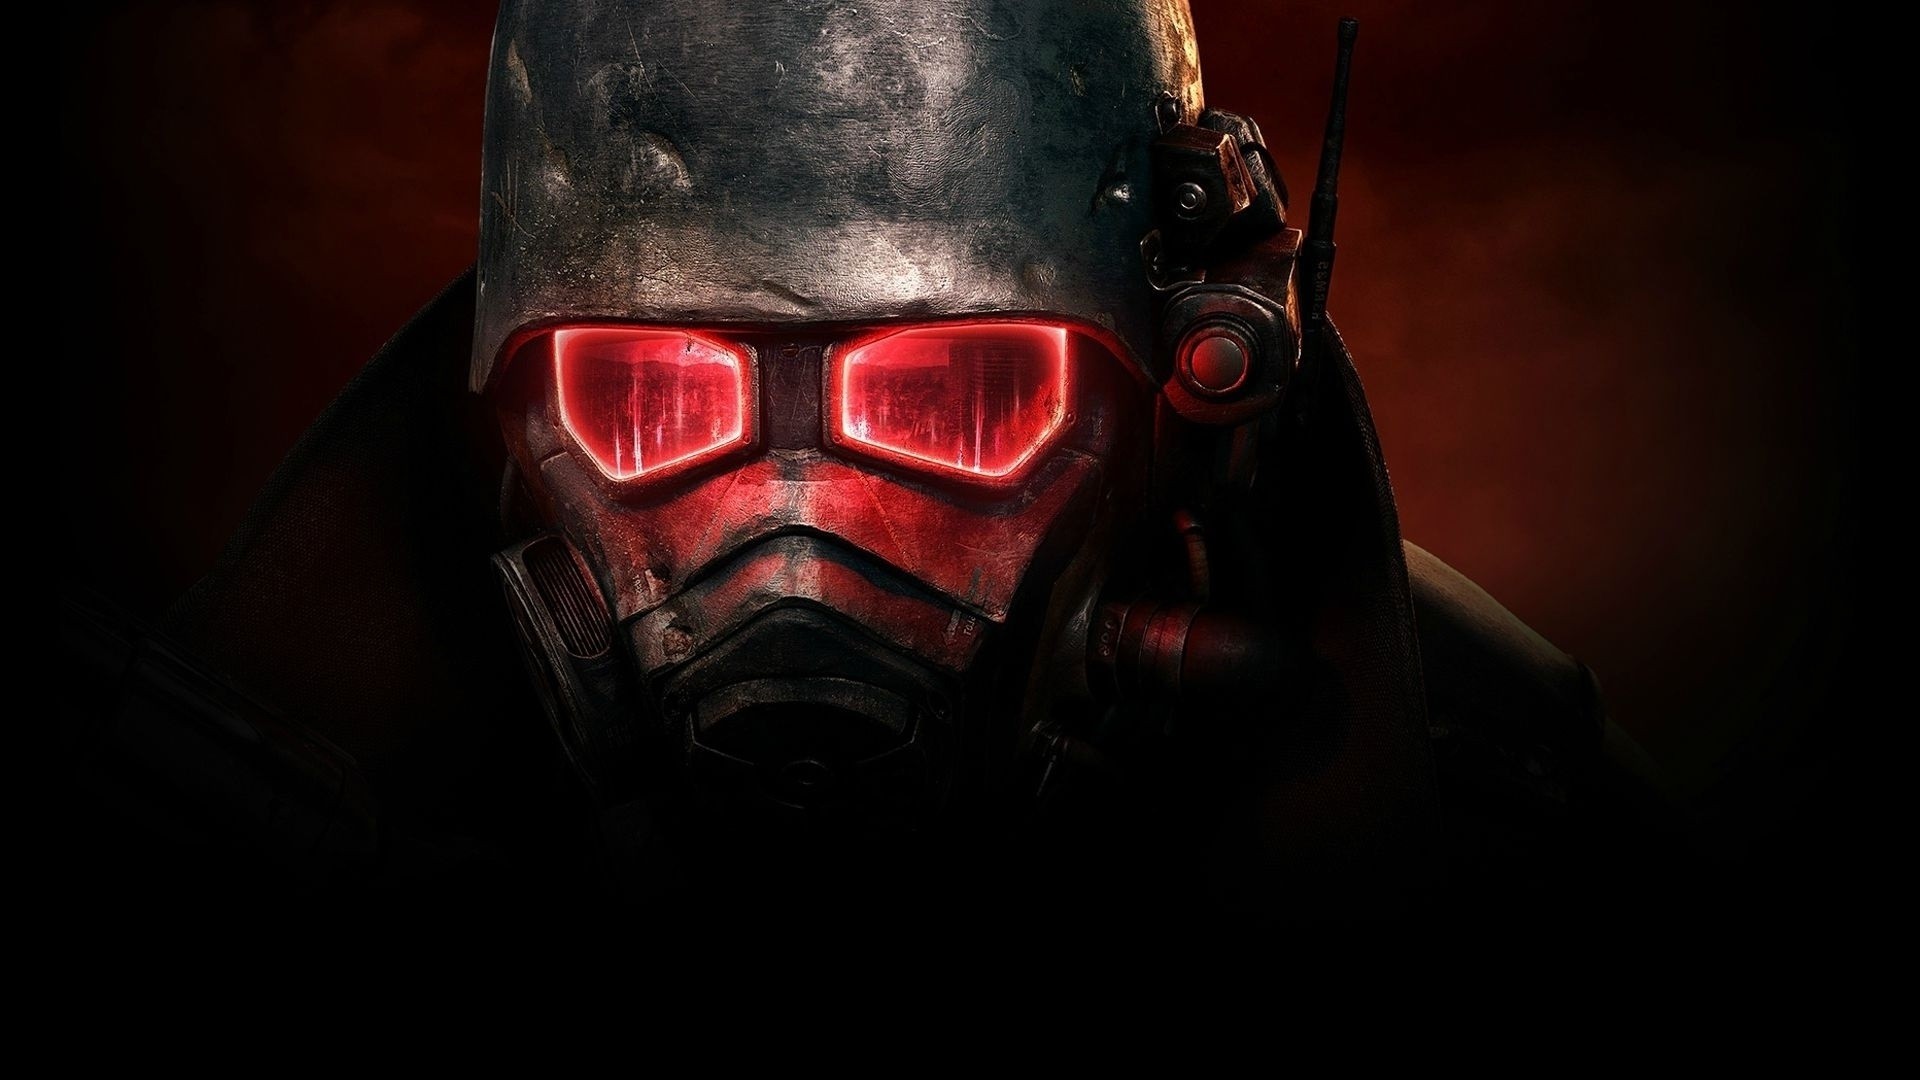 General 1920x1080 Fallout video games mask video game art red PC gaming armor apocalyptic Fallout: New Vegas